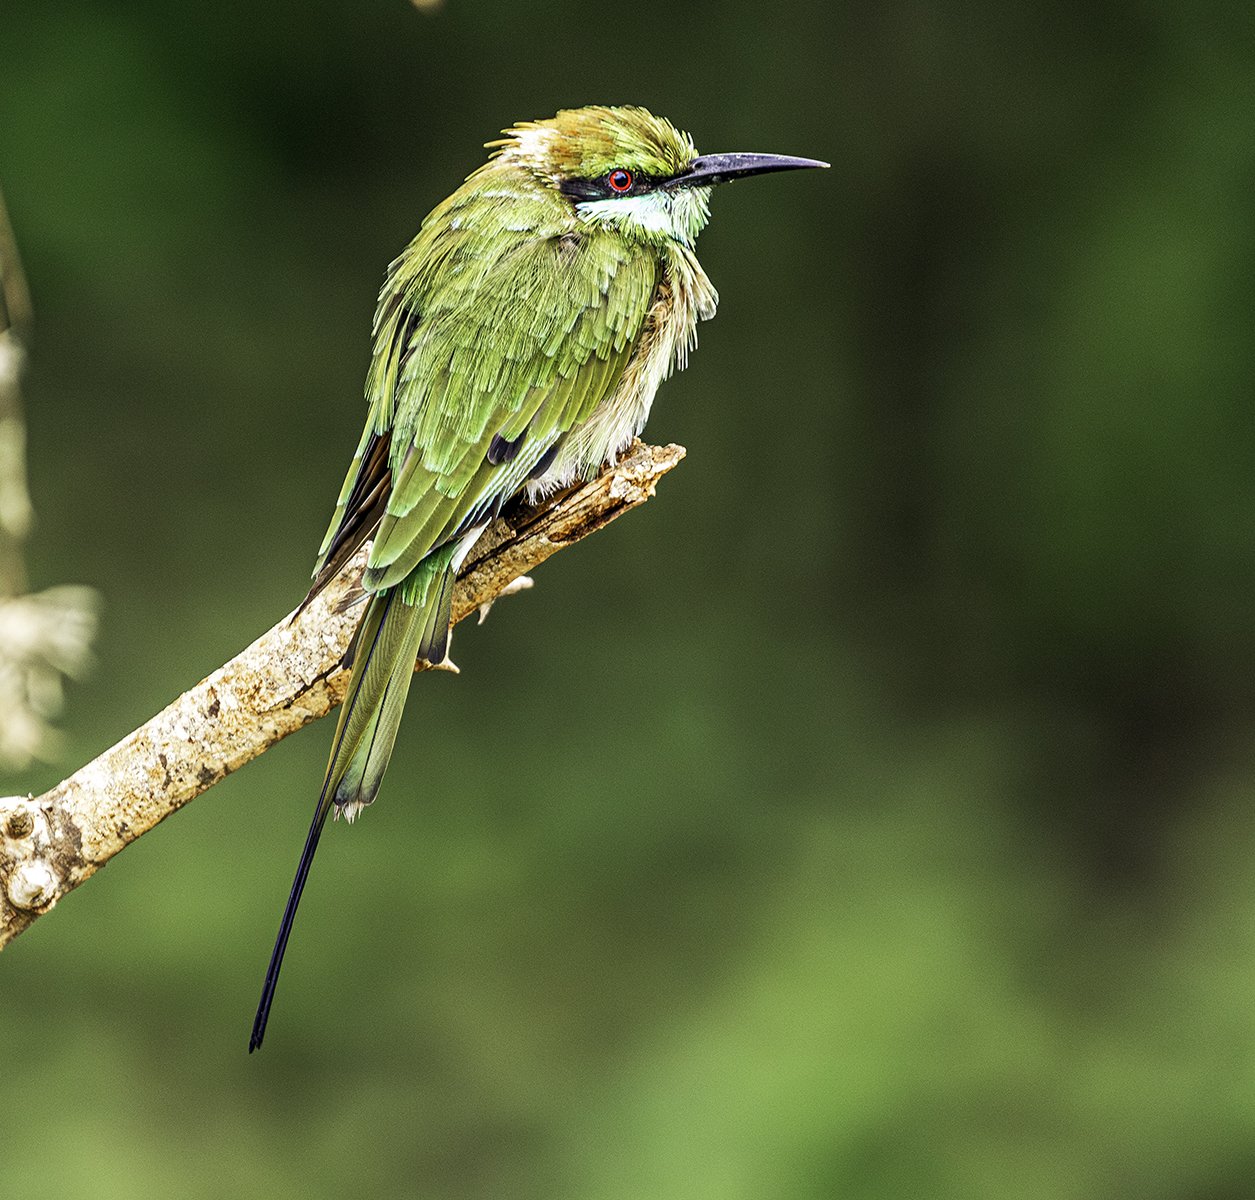 4. Green bee eater